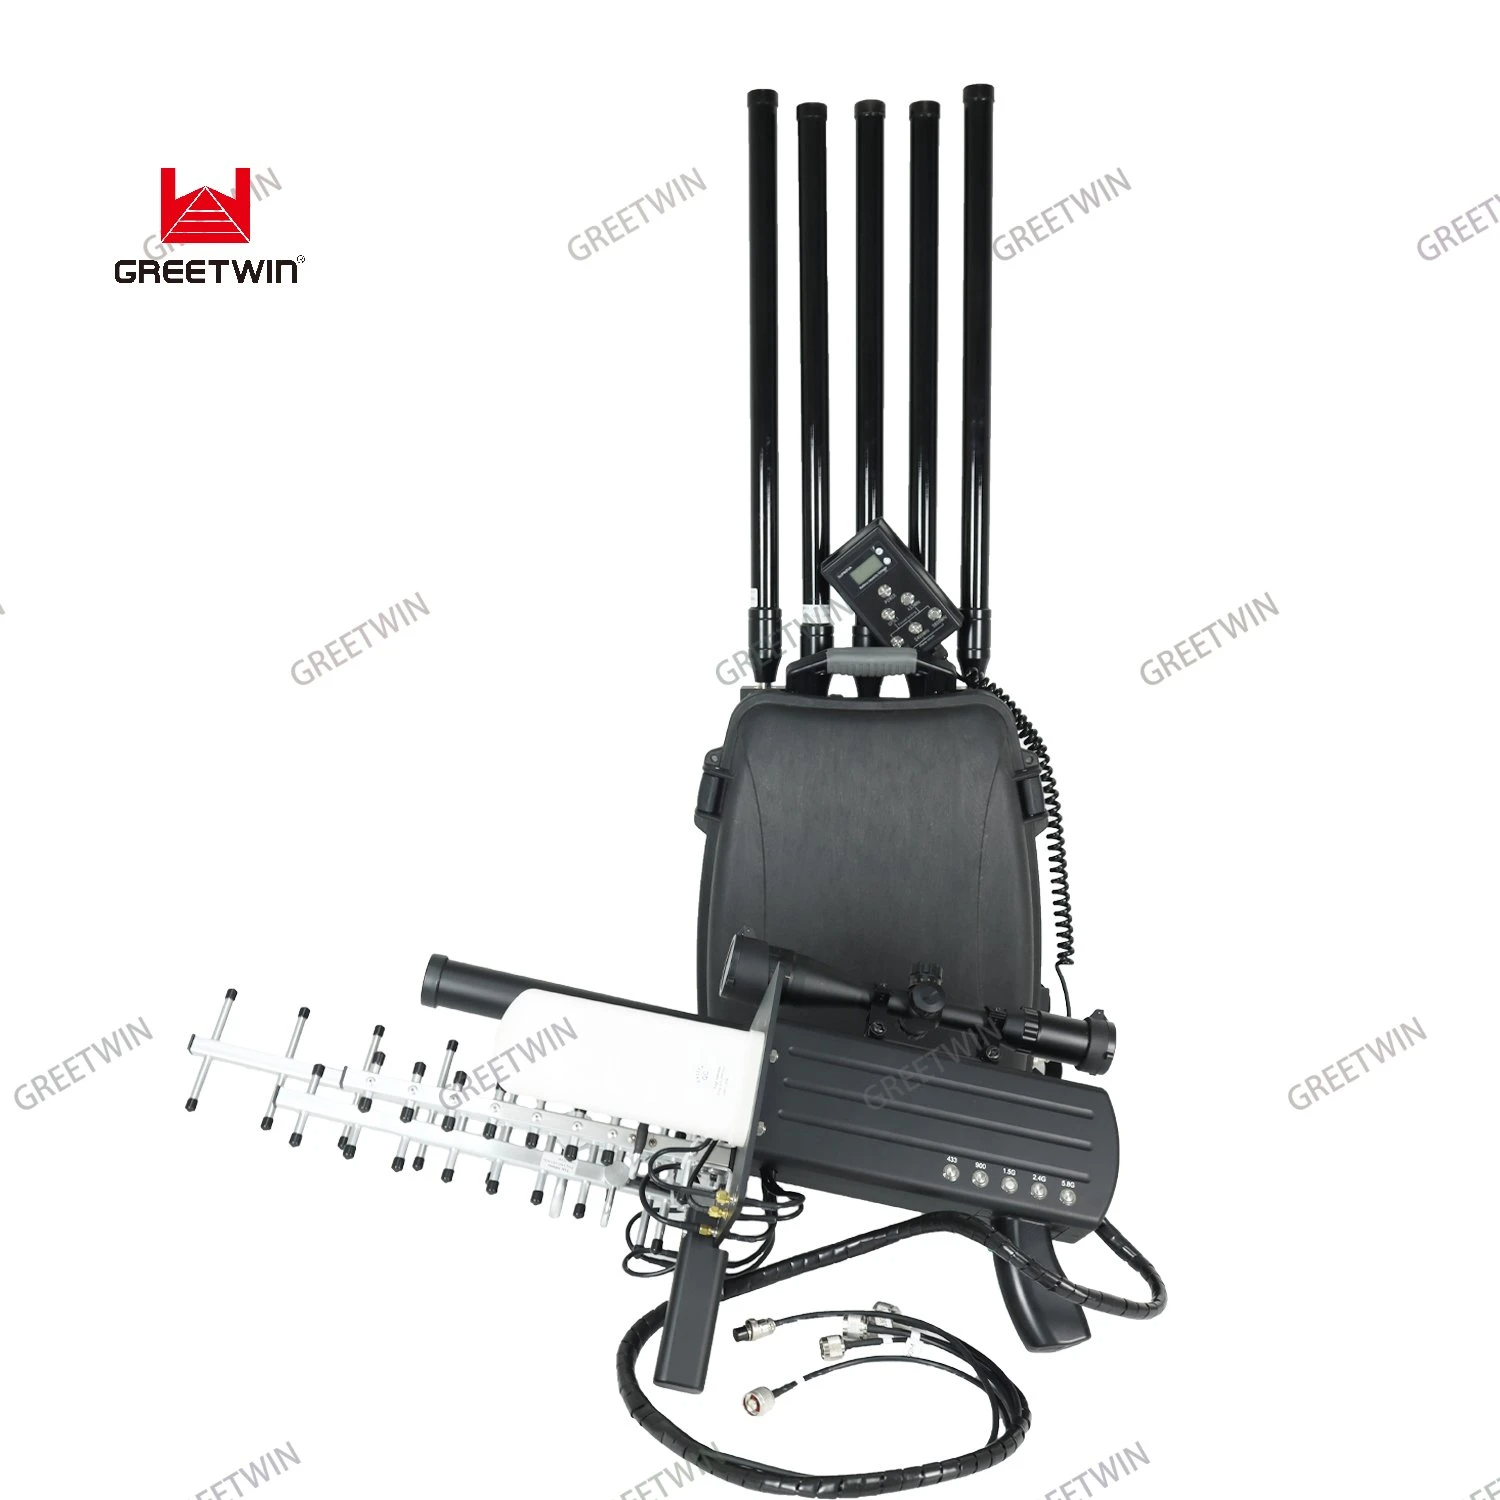 1.5km High Power Manpack 5 Channel Anti Drone System jammer